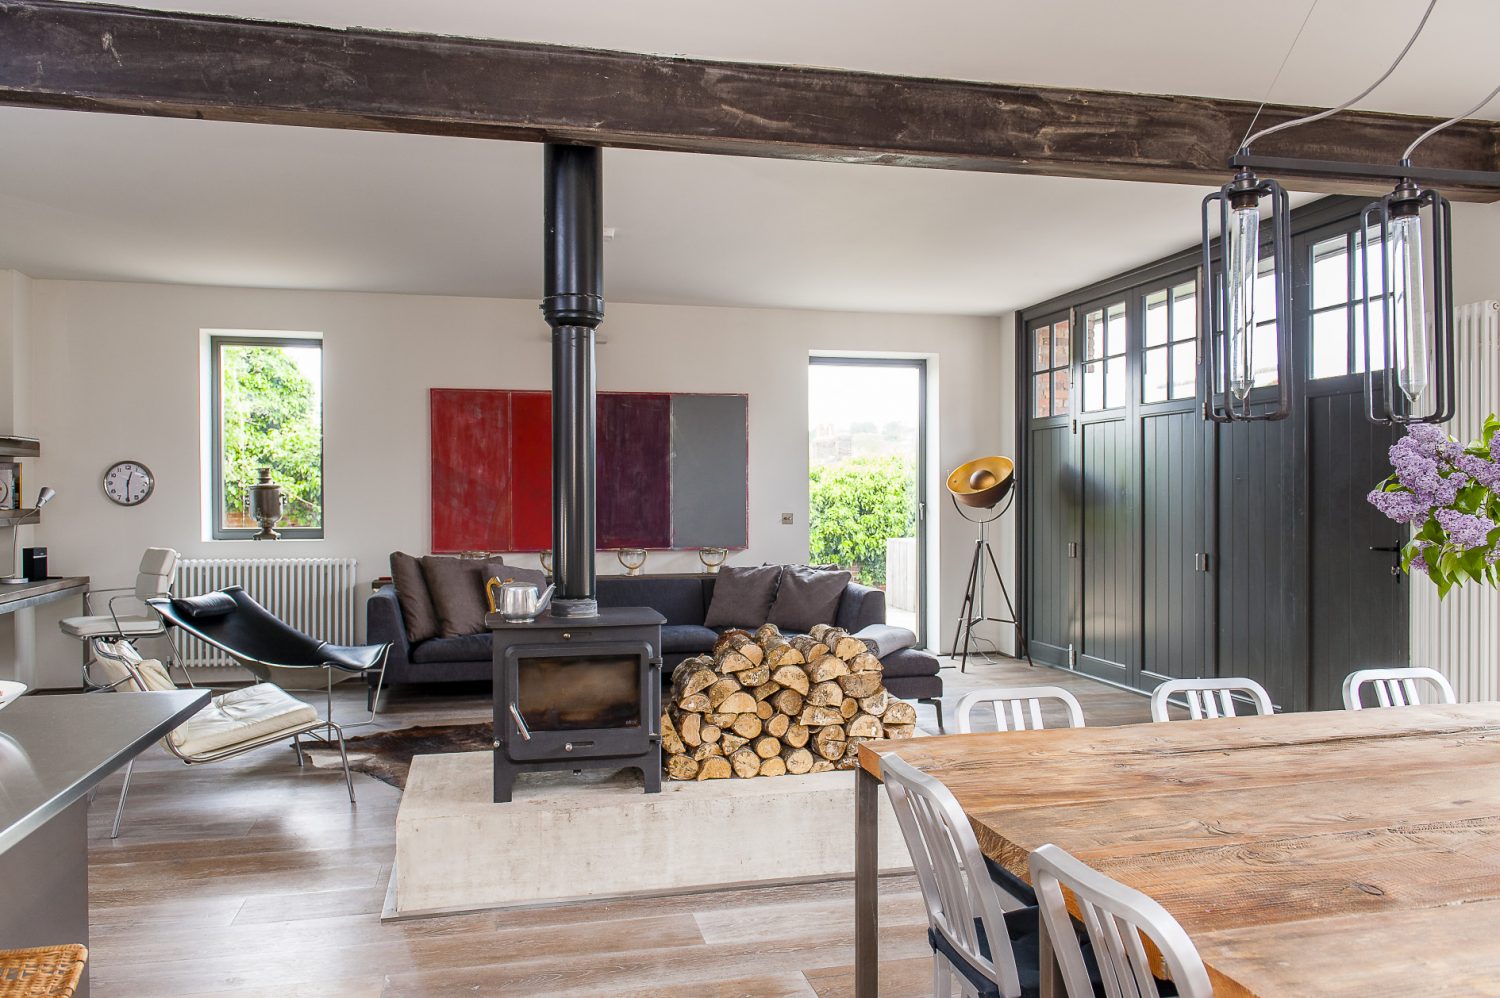 A new set of functional doors have been made in the same style. The double sided wood burning stove and adjacent log pile are housed on a huge concrete plinth, creating a focal point, whether the fire is lit or not